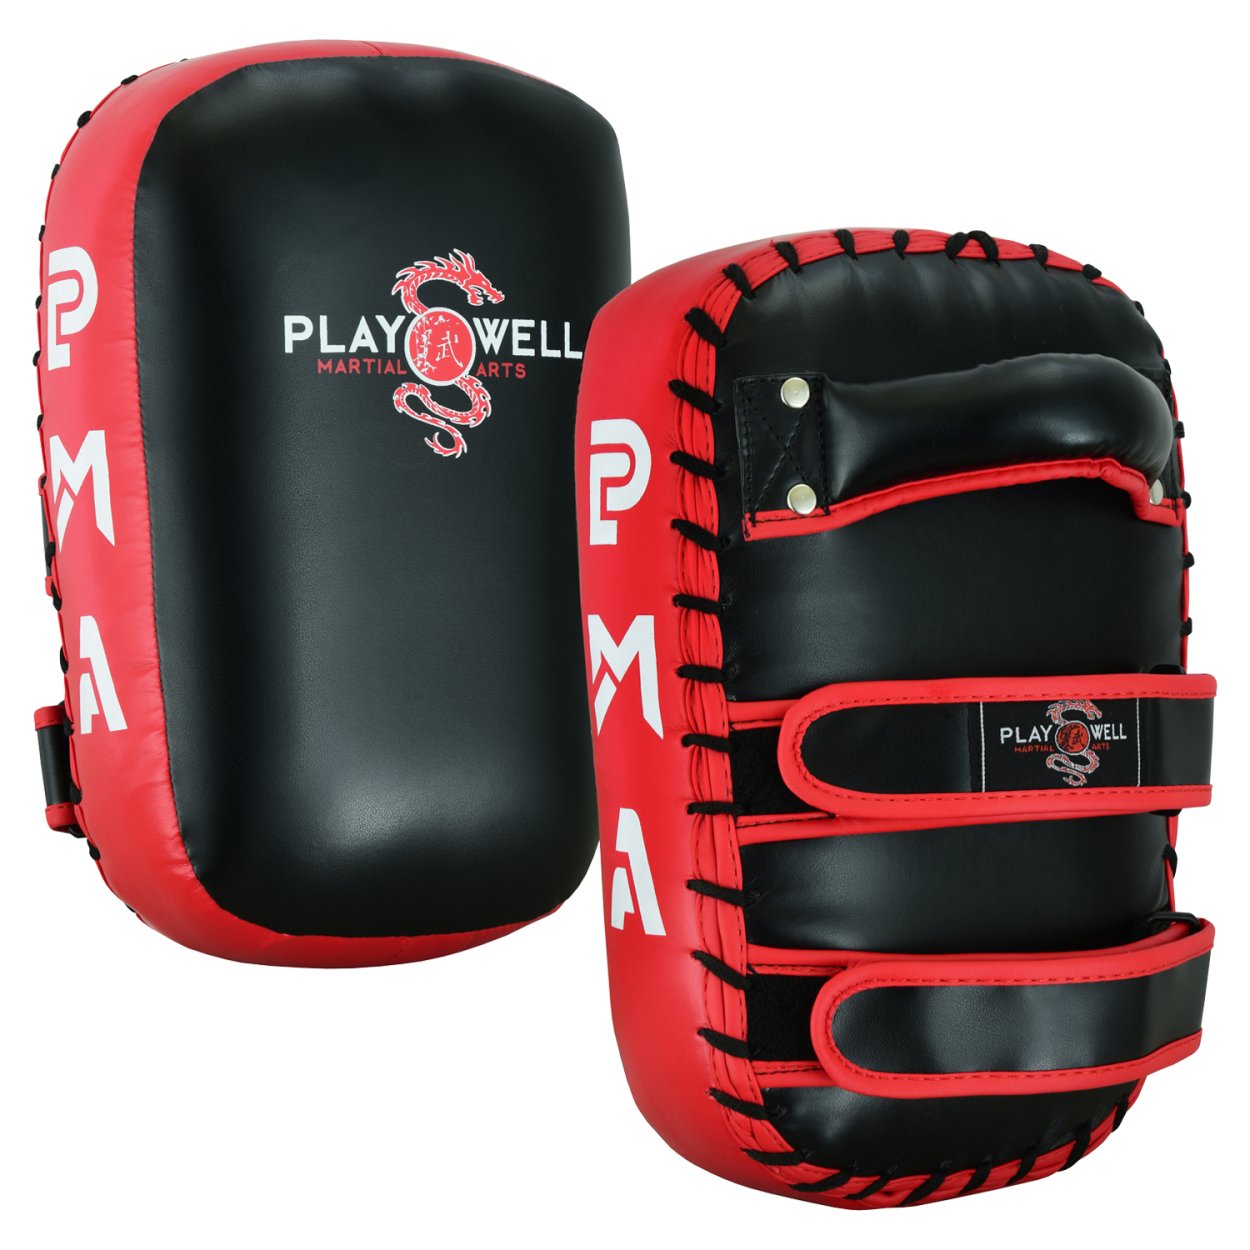 Childrens Muay Thai Air Kick Pads - for Kids only "!! - Click Image to Close